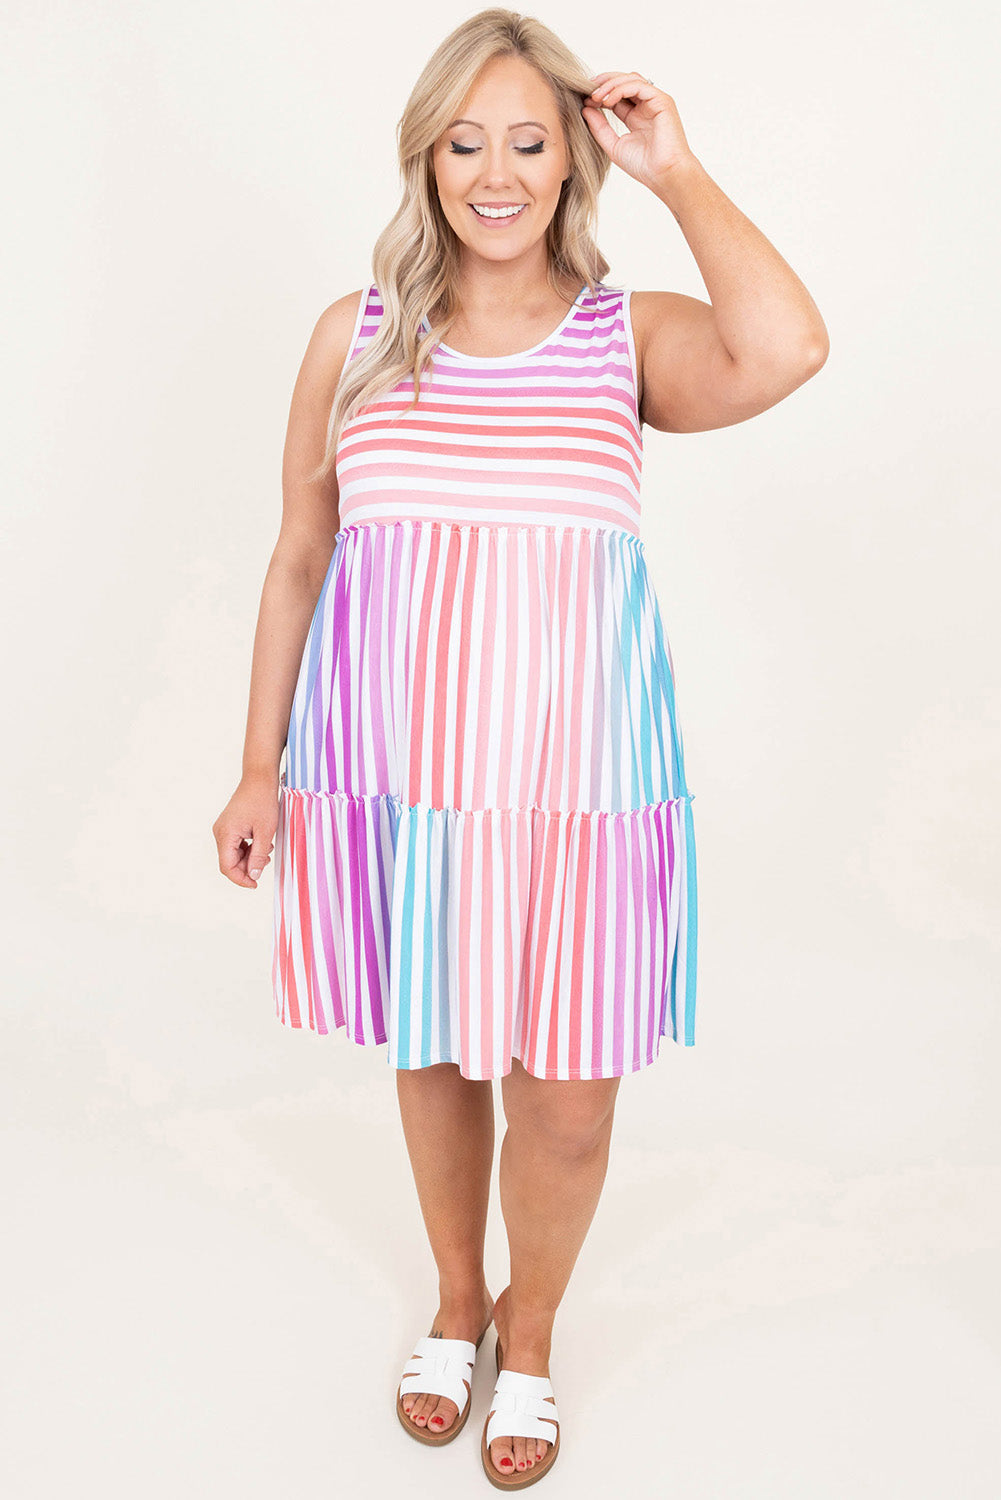 Multicolor Ombre Striped Sleeveless Tiered Plus Size Dress